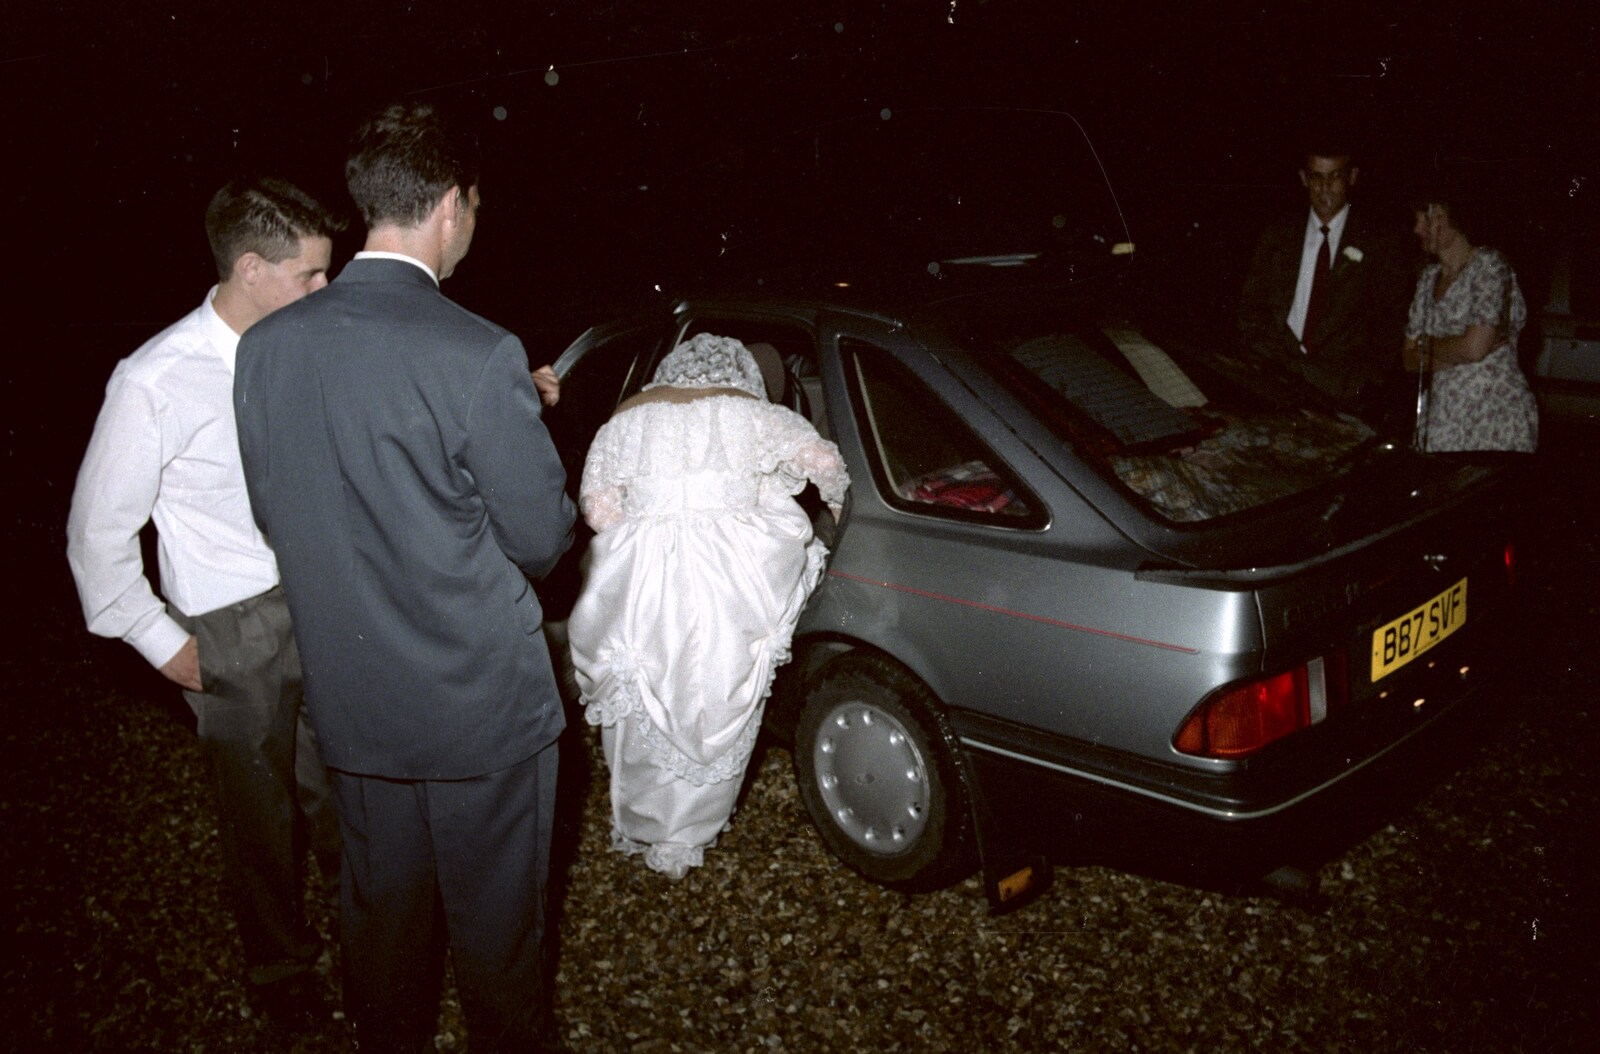 Kelly gets into the car from Printec Kelly's Wedding, Eye, Suffolk - 25th April 1992